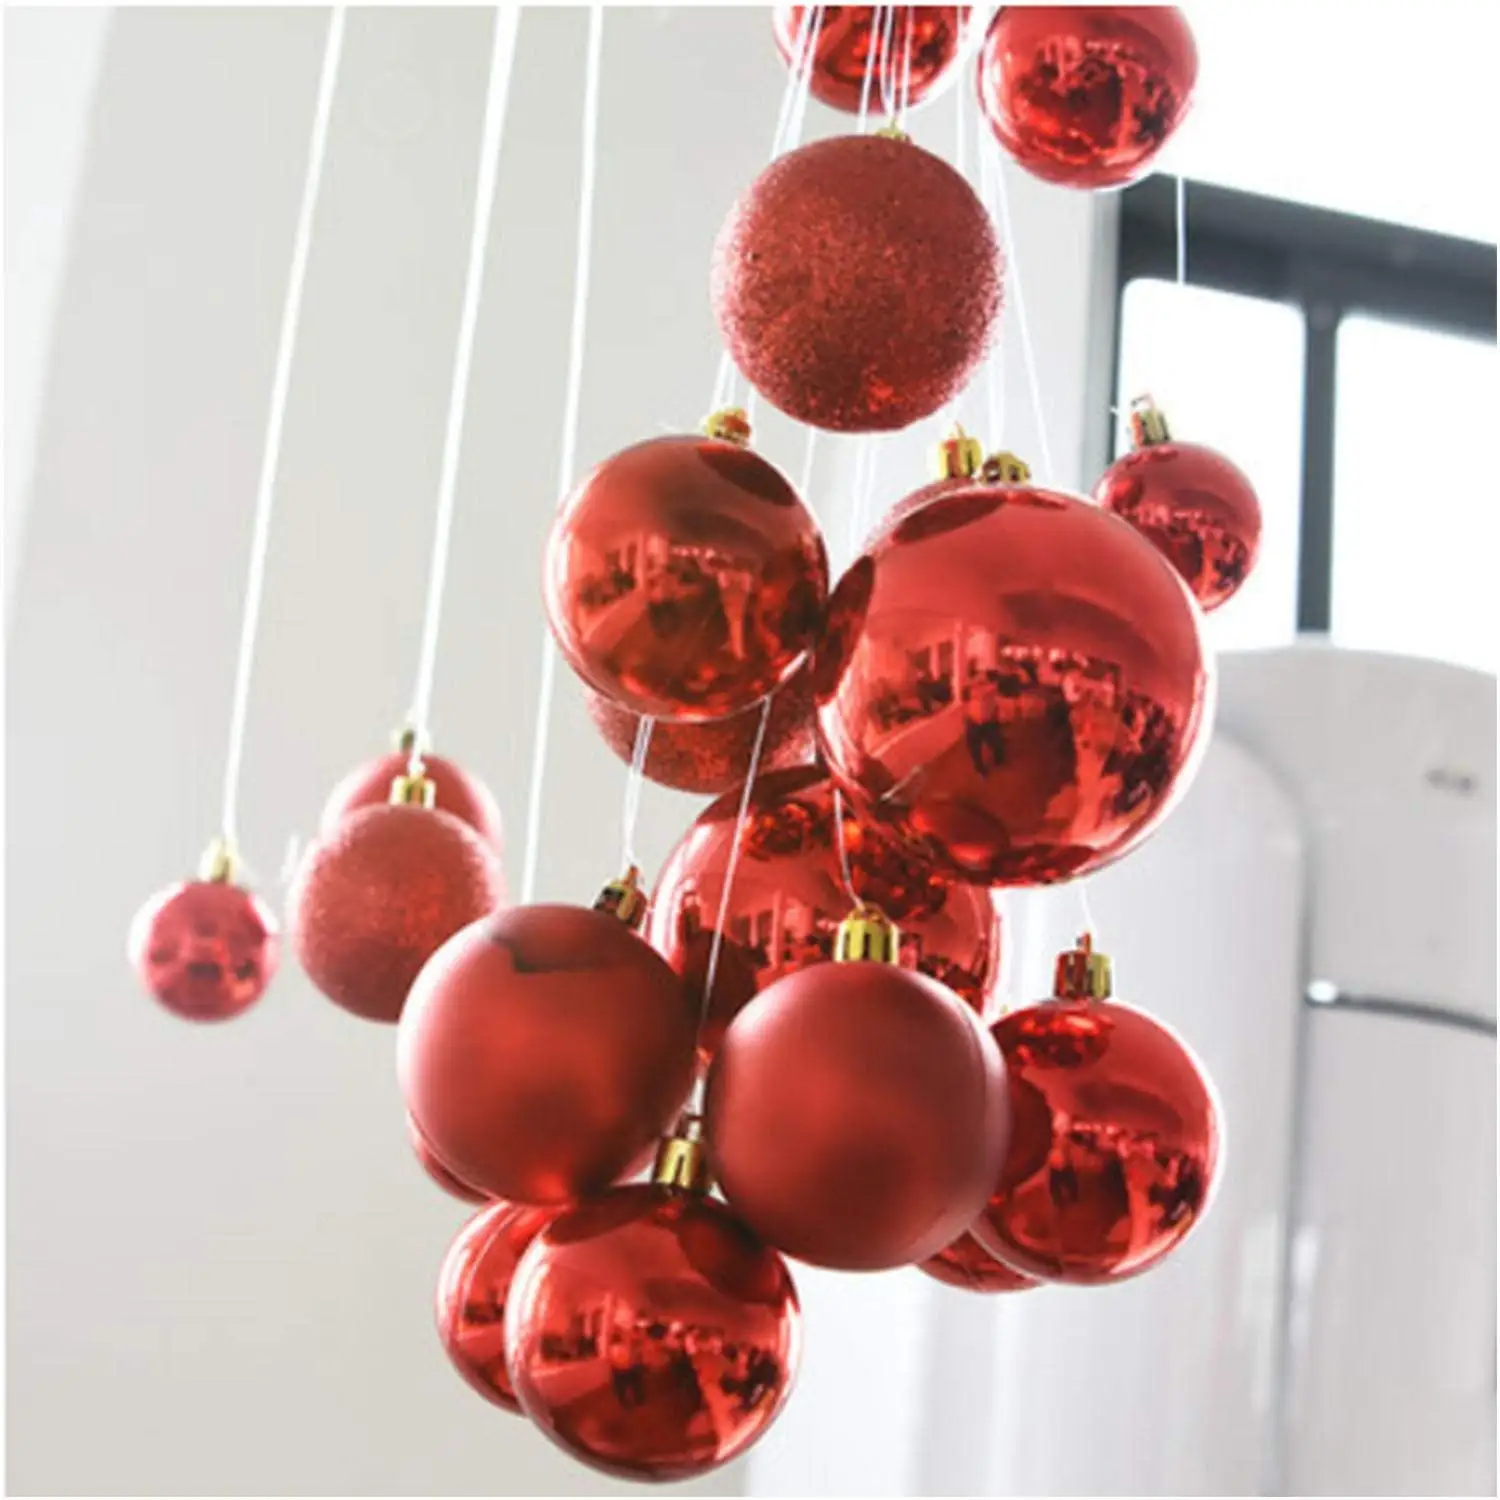 Christmas Ball Hanging Tool Ceiling Stick Adhesive Hooks 20 Pcs for Christmas Halloween Party Ceiling Hanging Ornaments Window Decrotions